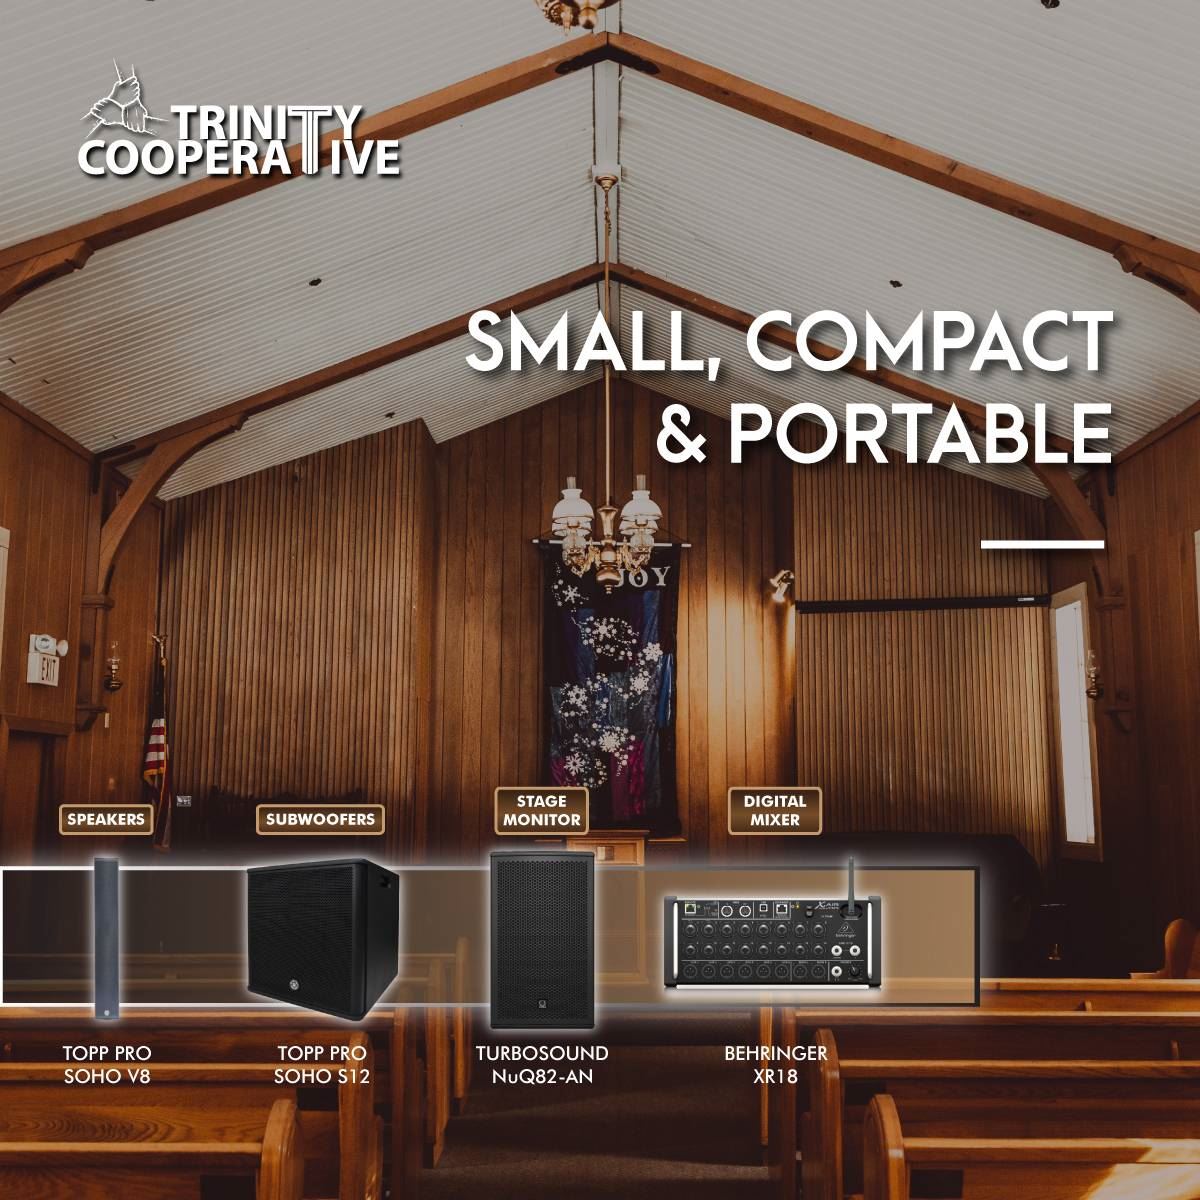 small-compact-portable-pa-system-for-church-topp-pro-soho-v8-s12-turbosound-nuq82-an-behringer-xr18